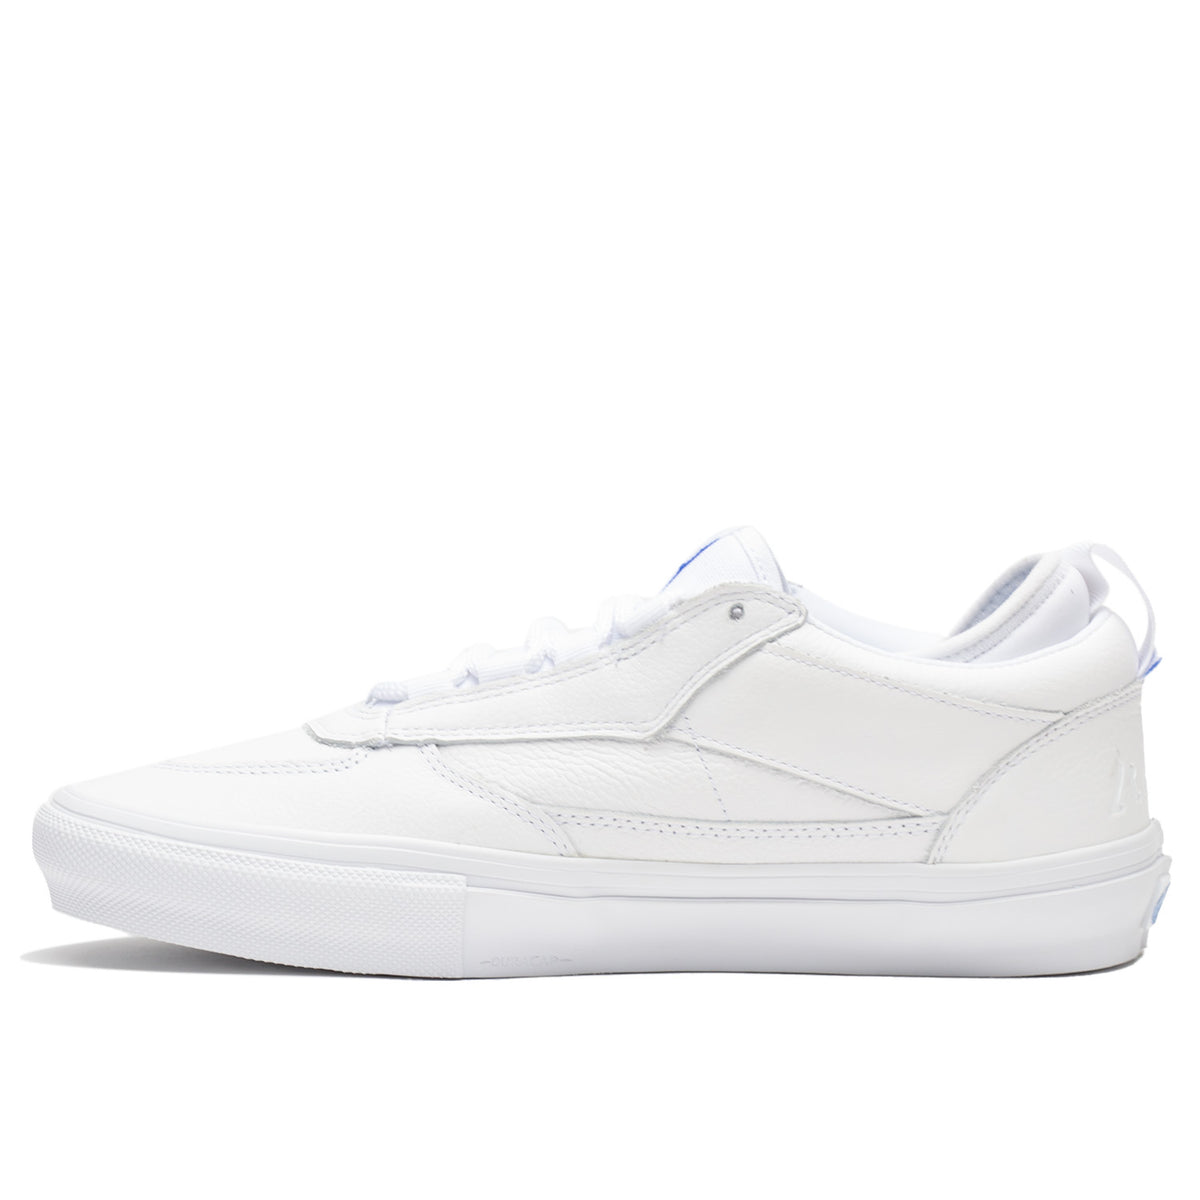 Vans - Safe Low Rory - White Leather